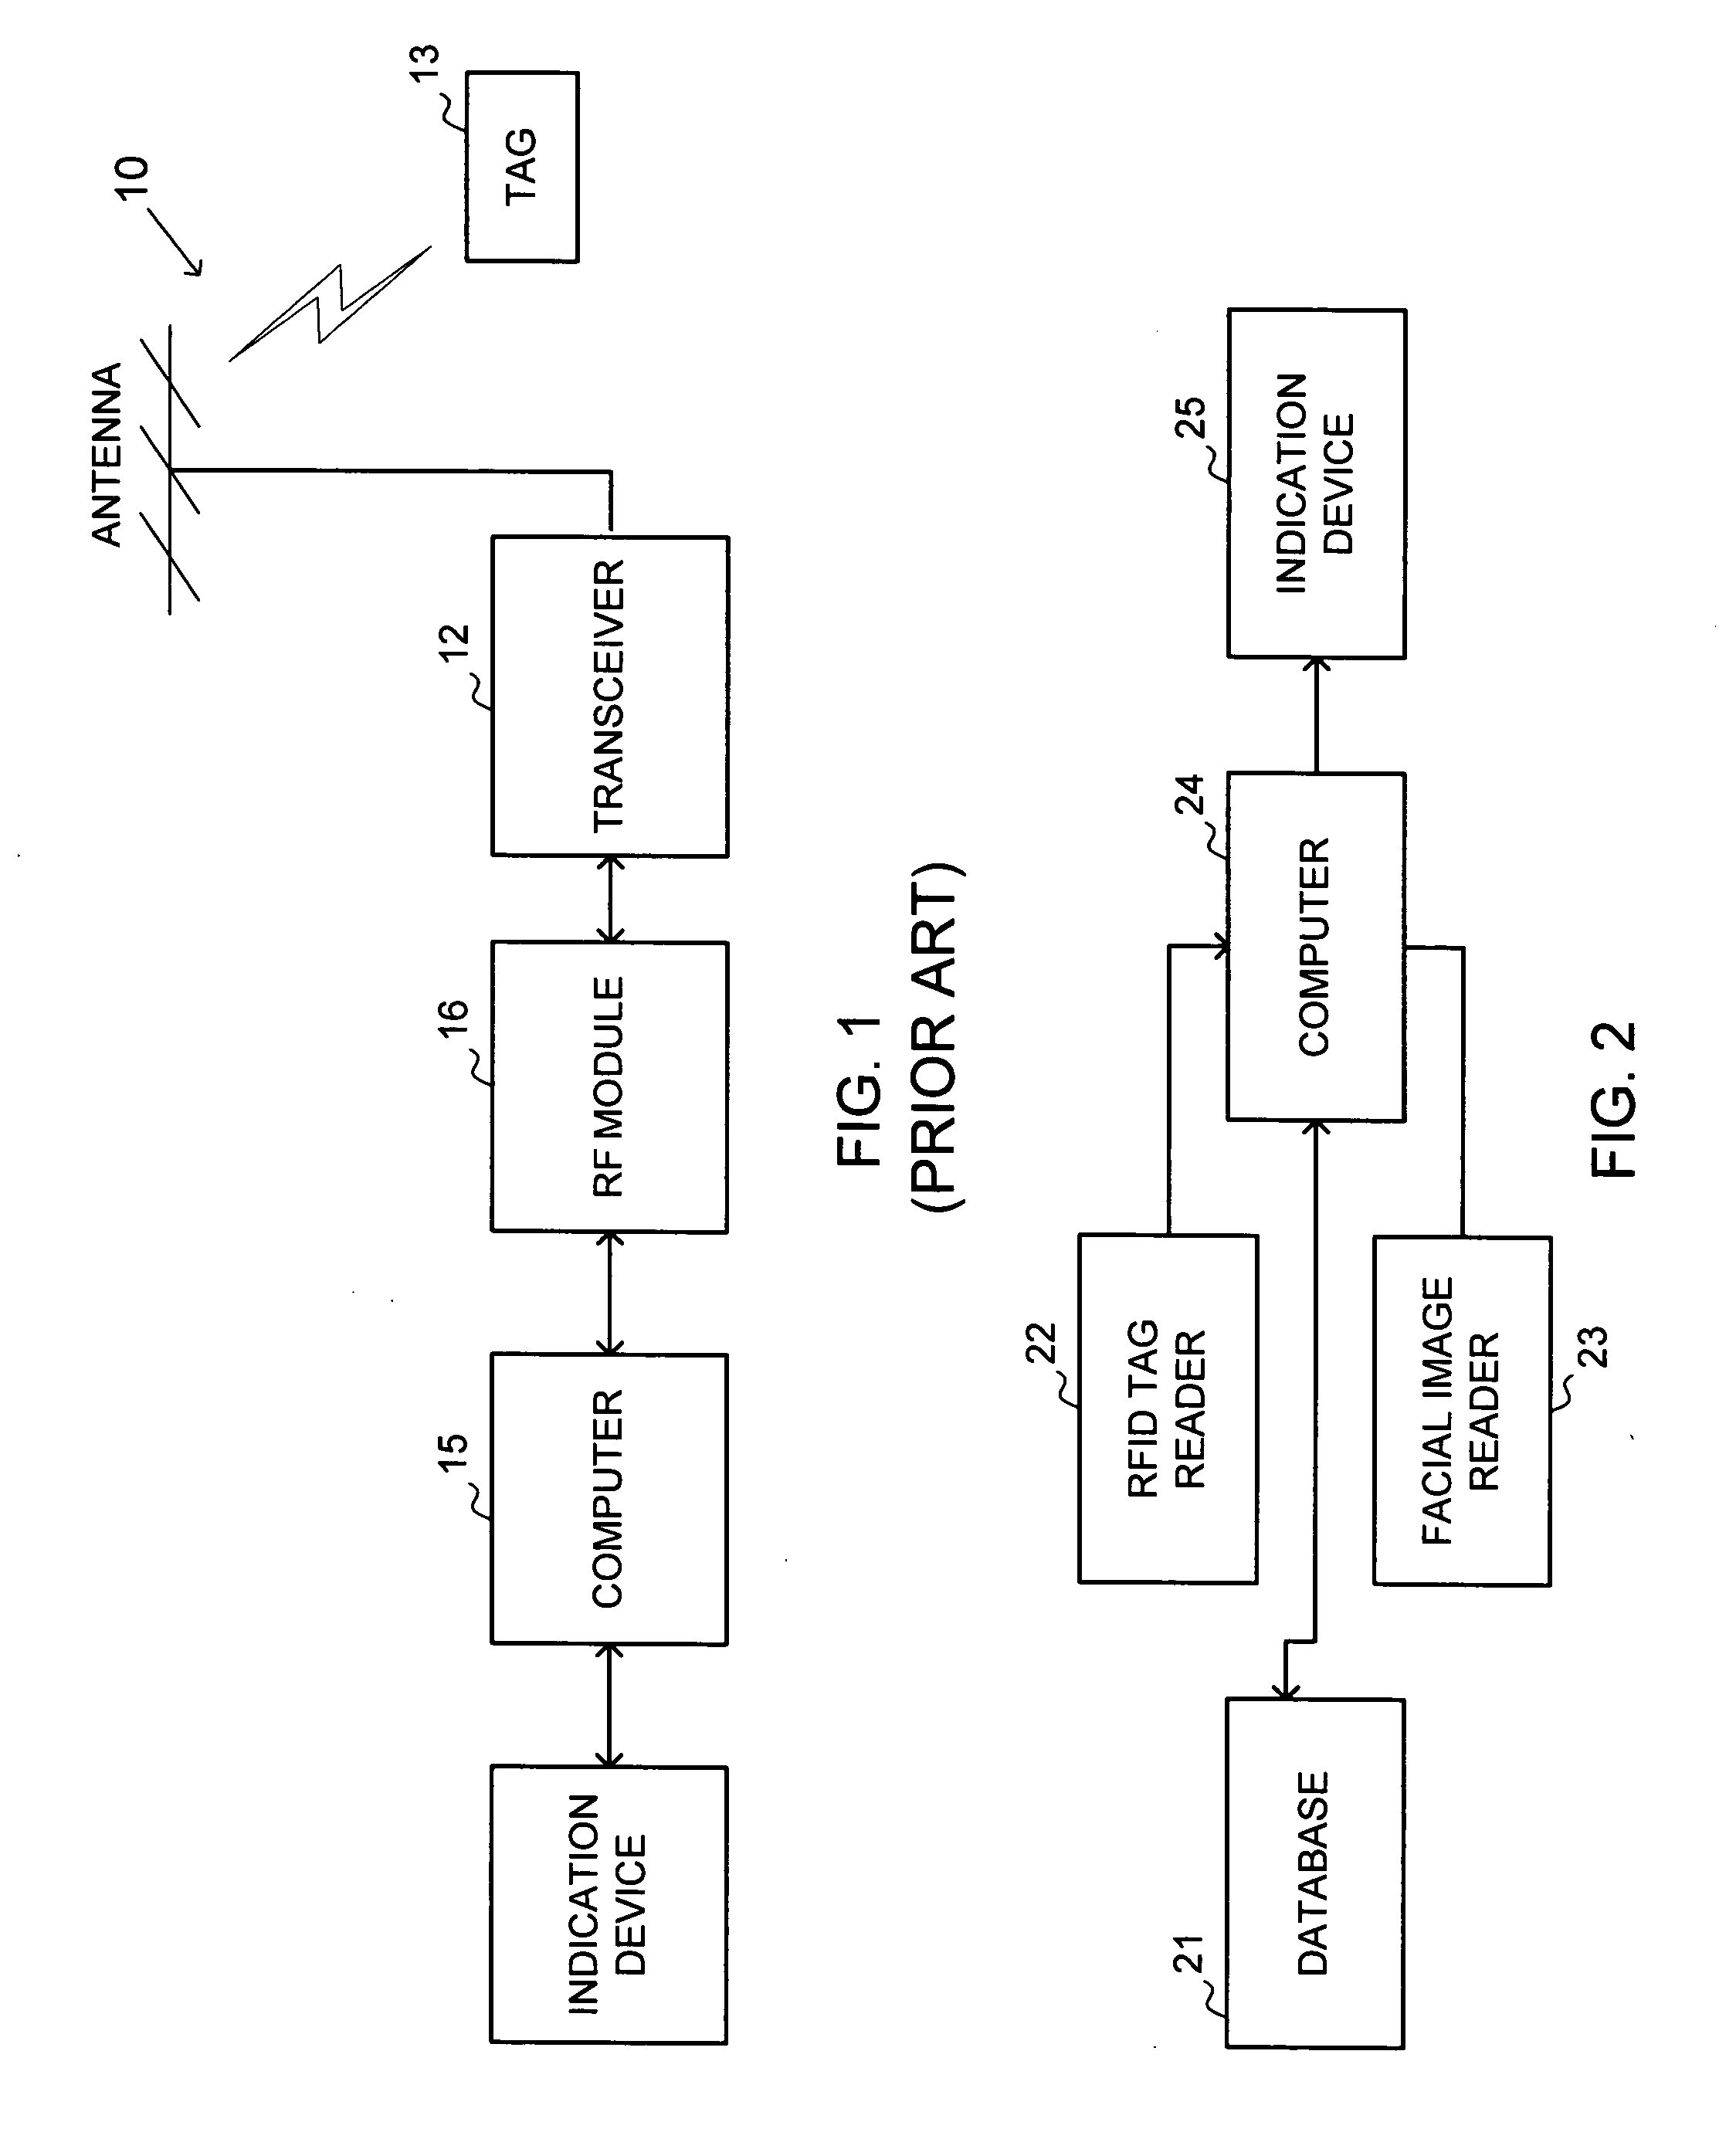 System and method for gate access control